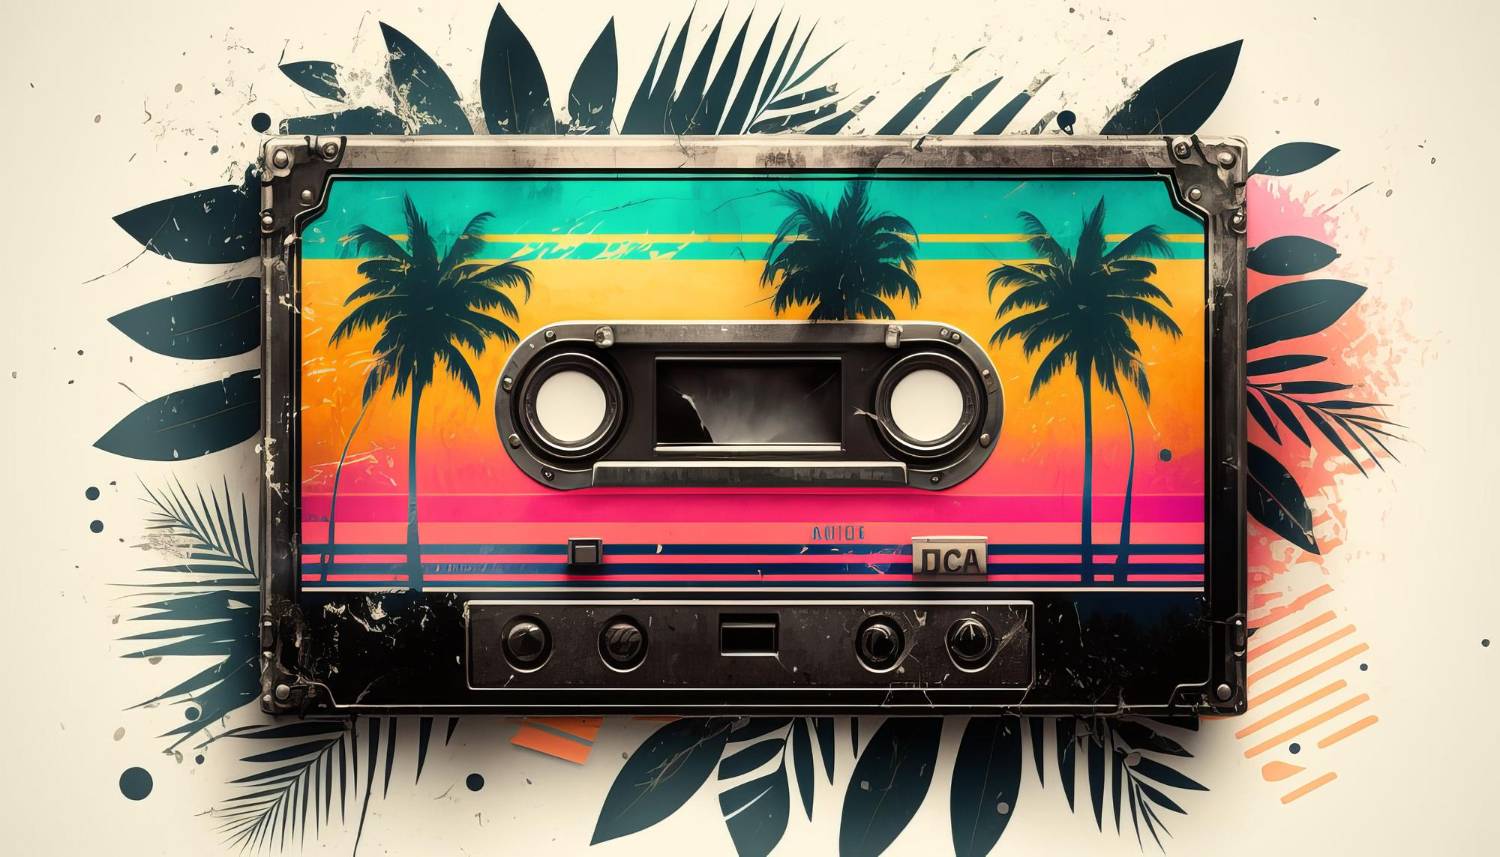 A vibrant cassette tape with a sunset and palm tree design, surrounded by tropical leaves, setting the mood for the perfect pontoon boat playlist.